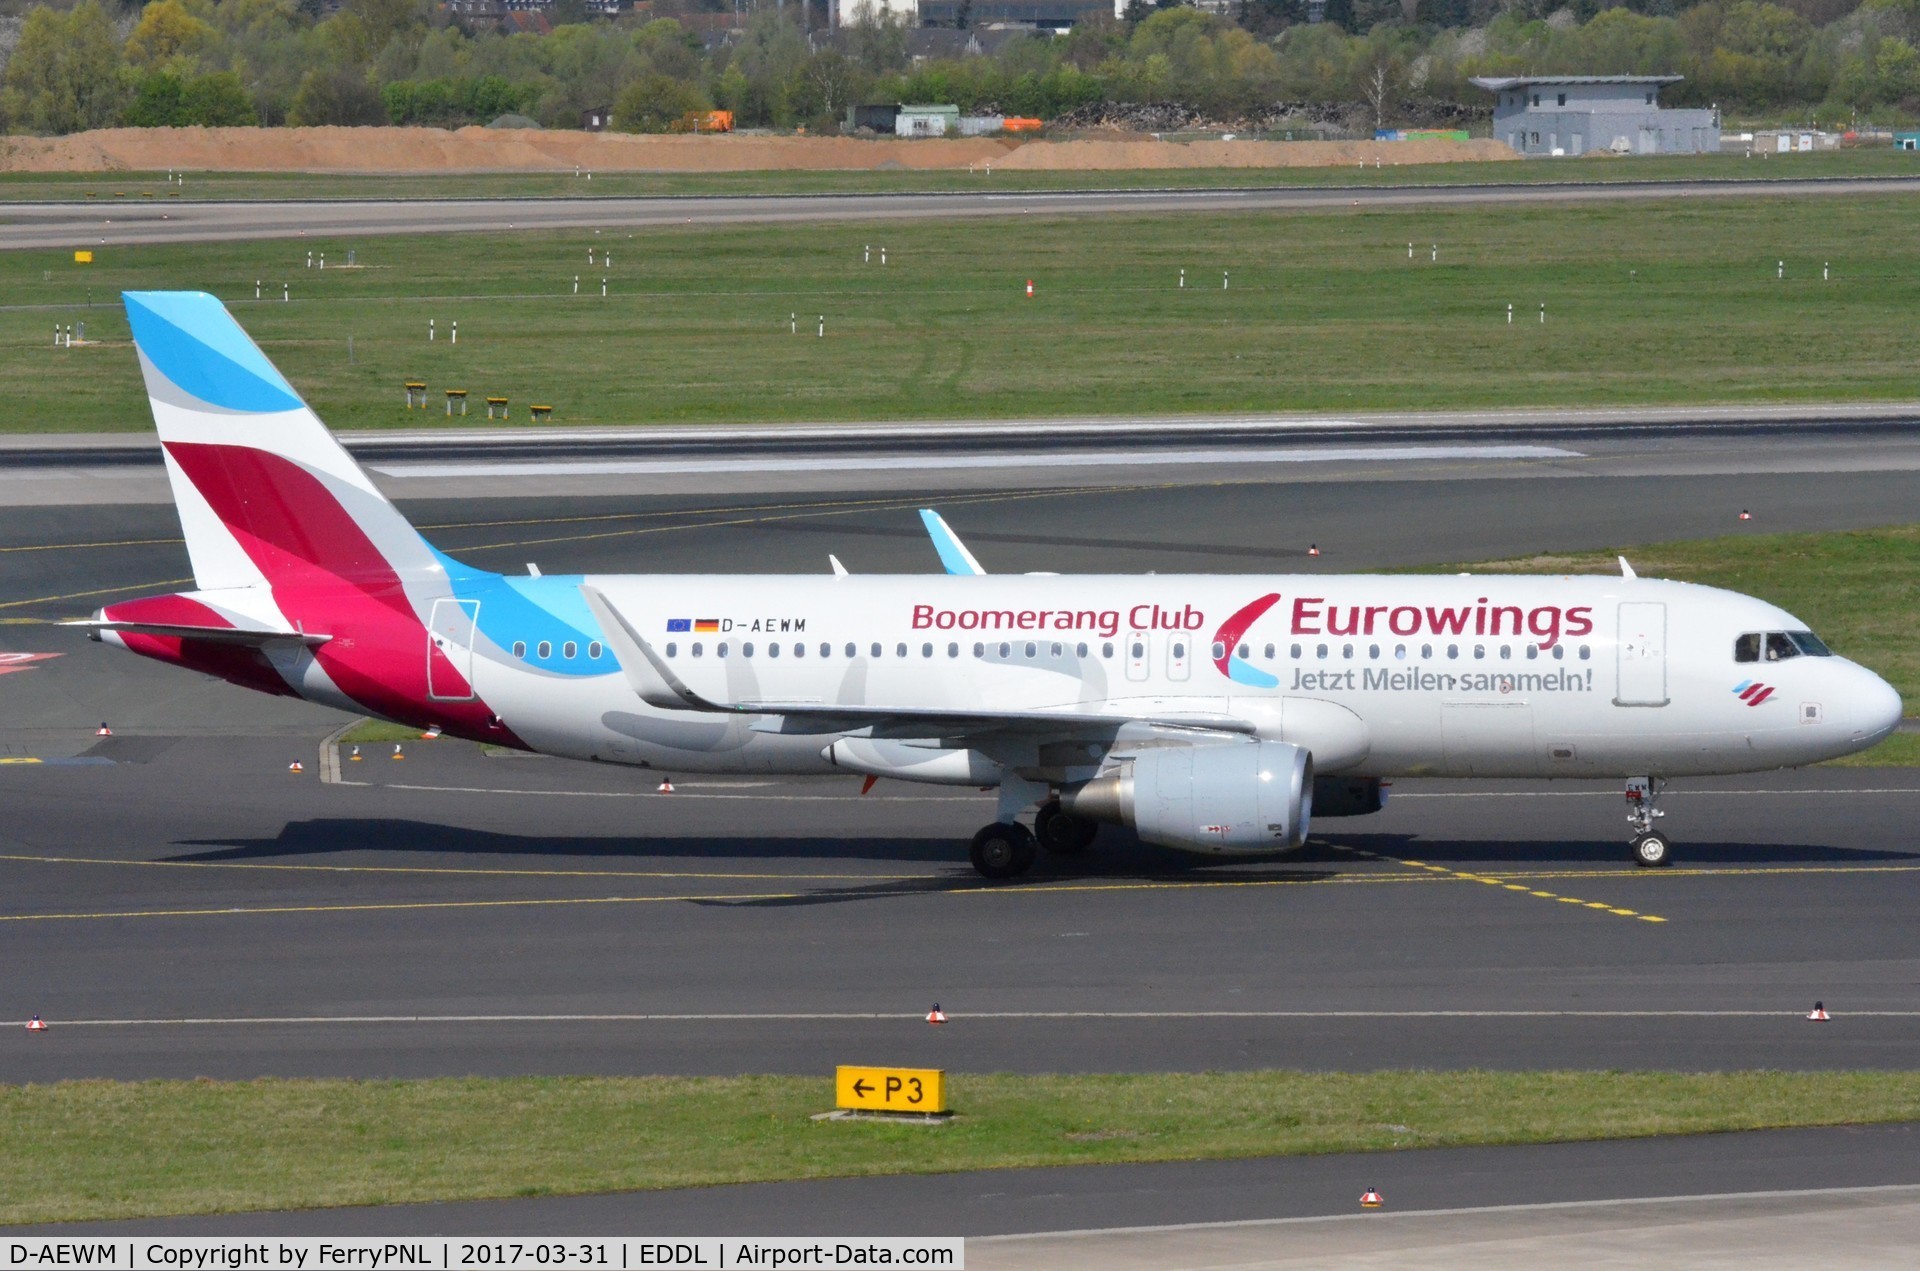 D-AEWM, 2016 Airbus A320-214 C/N 7259, Eurowings A320 promoting its loyalty programm